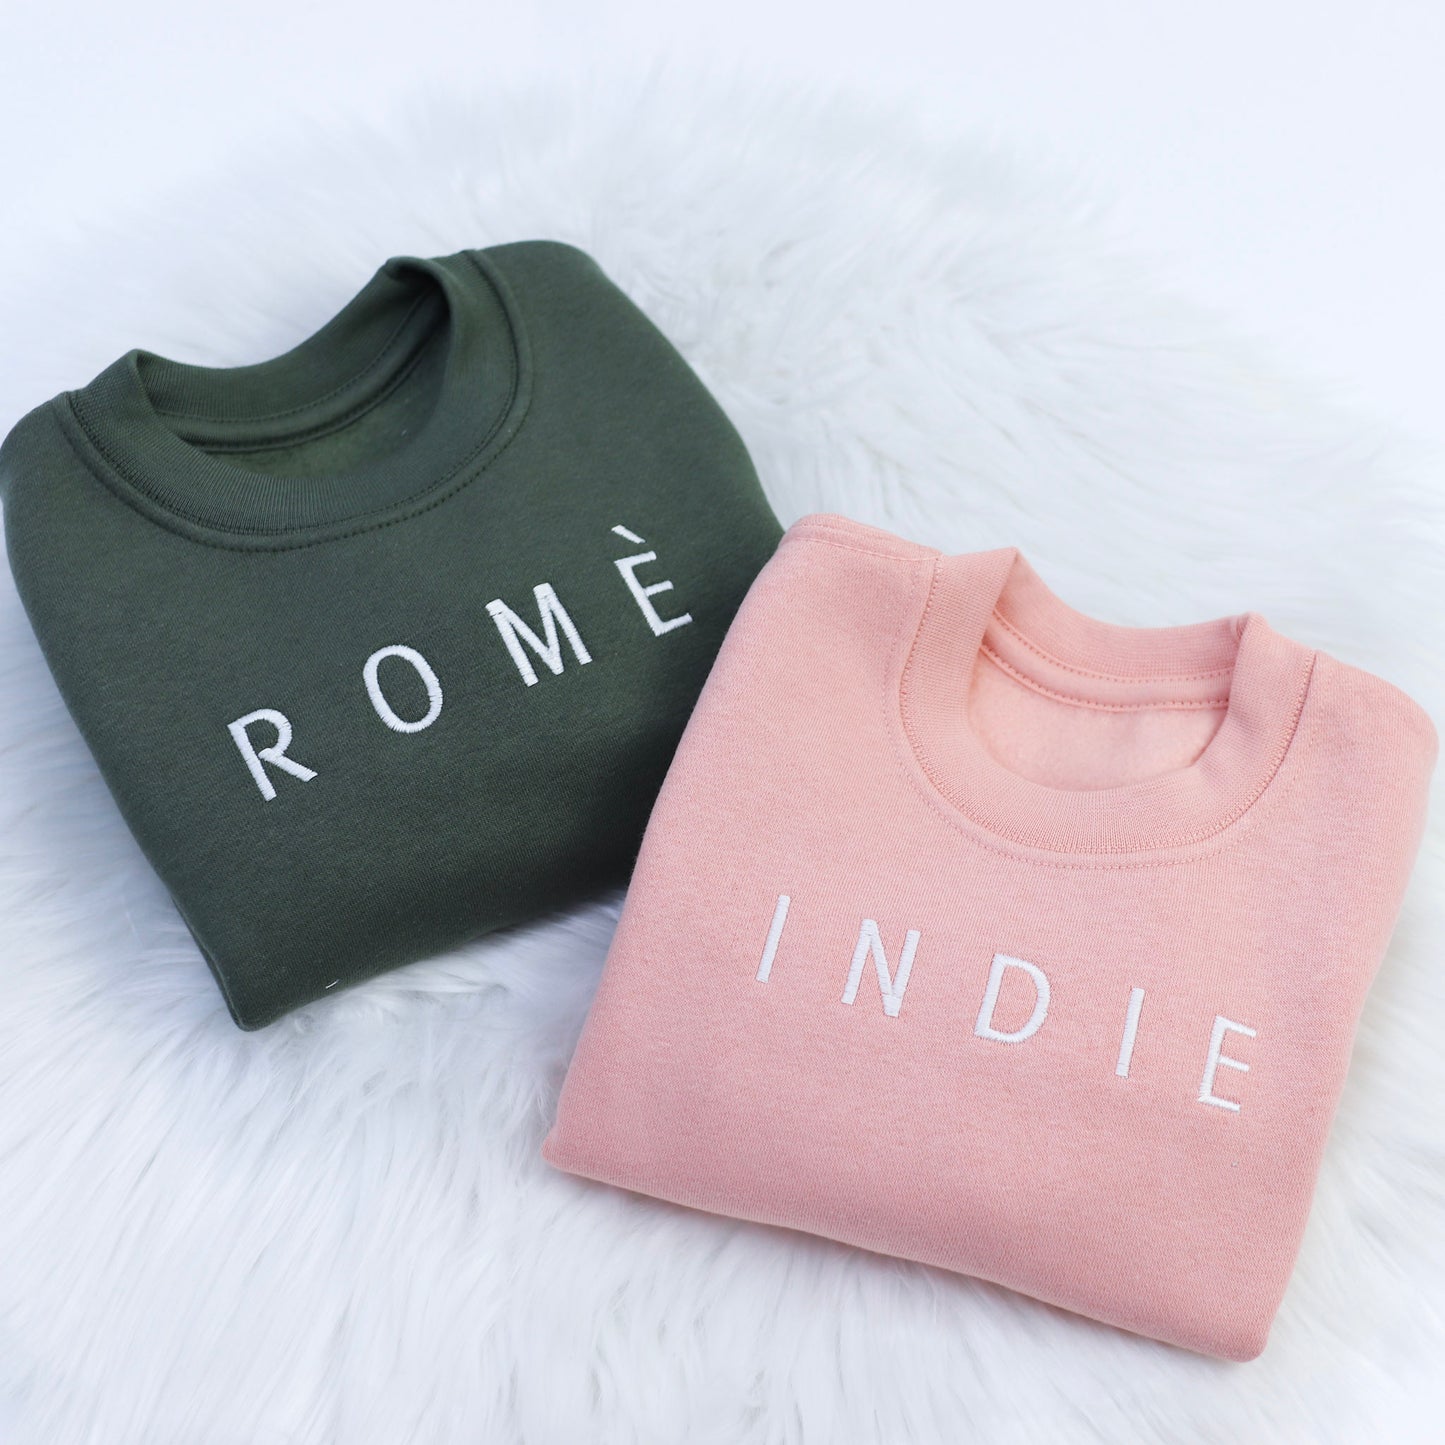 Space Block Embroidered Soft Style Sweatshirt